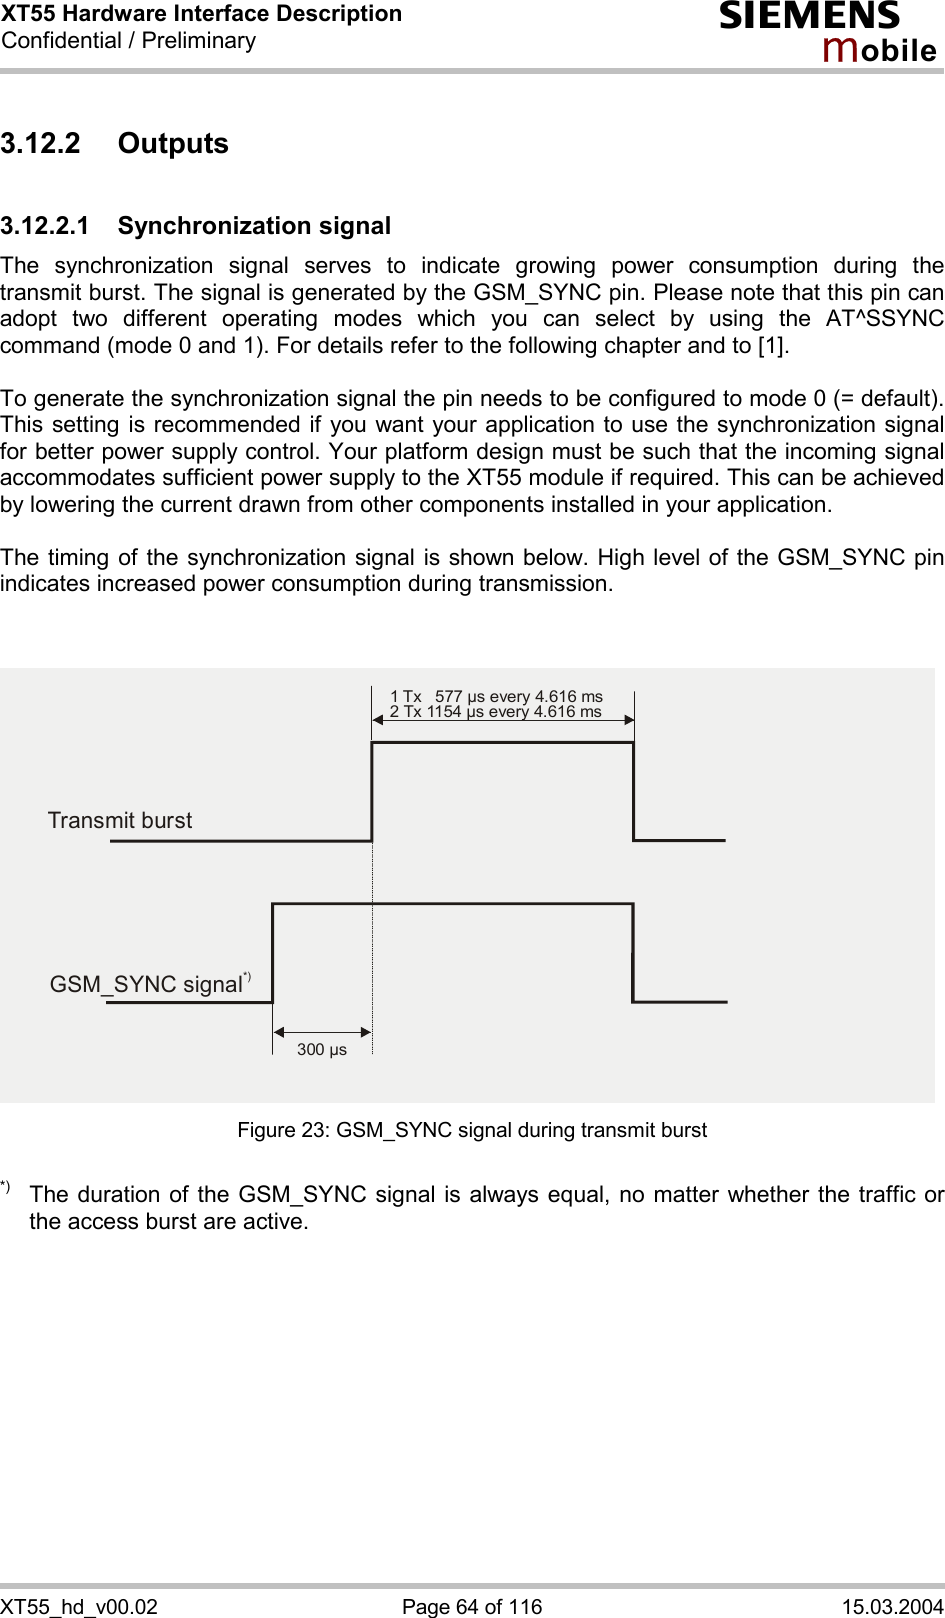 XT55 Hardware Interface Description Confidential / Preliminary s mo b i l e XT55_hd_v00.02  Page 64 of 116  15.03.2004 3.12.2 Outputs 3.12.2.1 Synchronization signal The synchronization signal serves to indicate growing power consumption during the transmit burst. The signal is generated by the GSM_SYNC pin. Please note that this pin can adopt two different operating modes which you can select by using the AT^SSYNC command (mode 0 and 1). For details refer to the following chapter and to [1].  To generate the synchronization signal the pin needs to be configured to mode 0 (= default). This setting is recommended if you want your application to use the synchronization signal for better power supply control. Your platform design must be such that the incoming signal accommodates sufficient power supply to the XT55 module if required. This can be achieved by lowering the current drawn from other components installed in your application.   The timing of the synchronization signal is shown below. High level of the GSM_SYNC pin indicates increased power consumption during transmission.   Figure 23: GSM_SYNC signal during transmit burst  *)  The duration of the GSM_SYNC signal is always equal, no matter whether the traffic or the access burst are active.  Transmit burst1 Tx   577 µs every 4.616 ms2 Tx 1154 µs every 4.616 ms300 µsGSM_SYNC signal*)